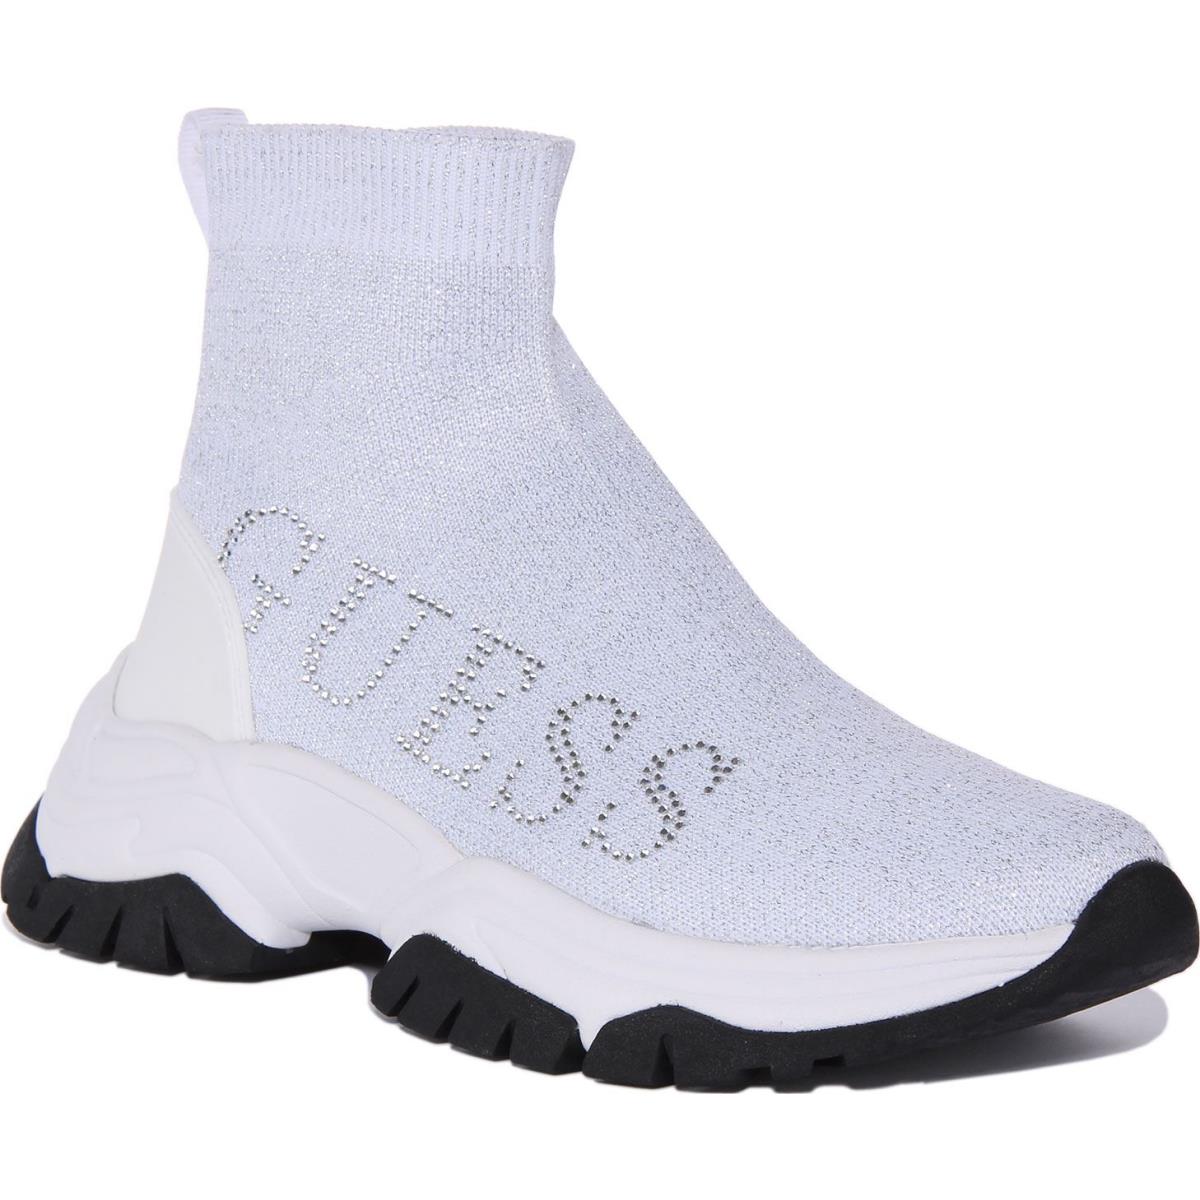 Guess Fl5Nllfab12 Nollen Womens Pull On Fashion Sneaker In White US Size 5 - 10 WHITE